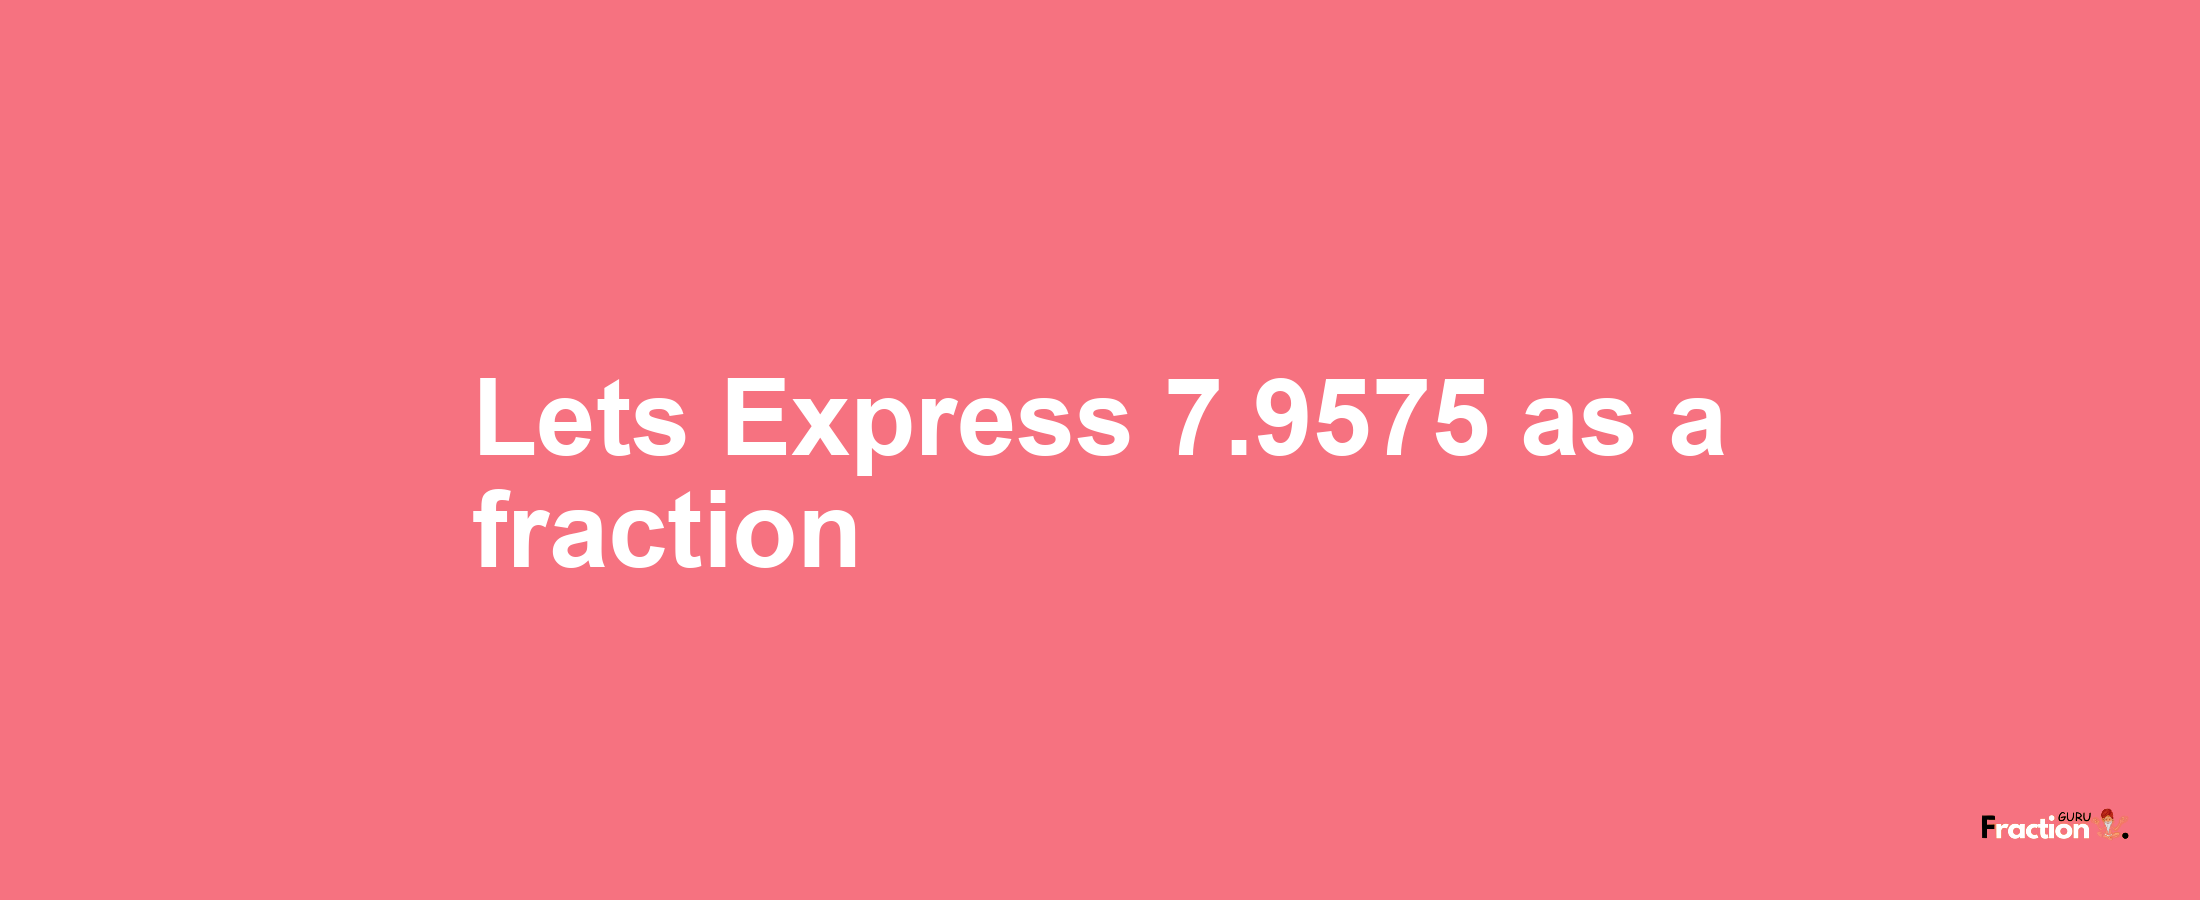 Lets Express 7.9575 as afraction